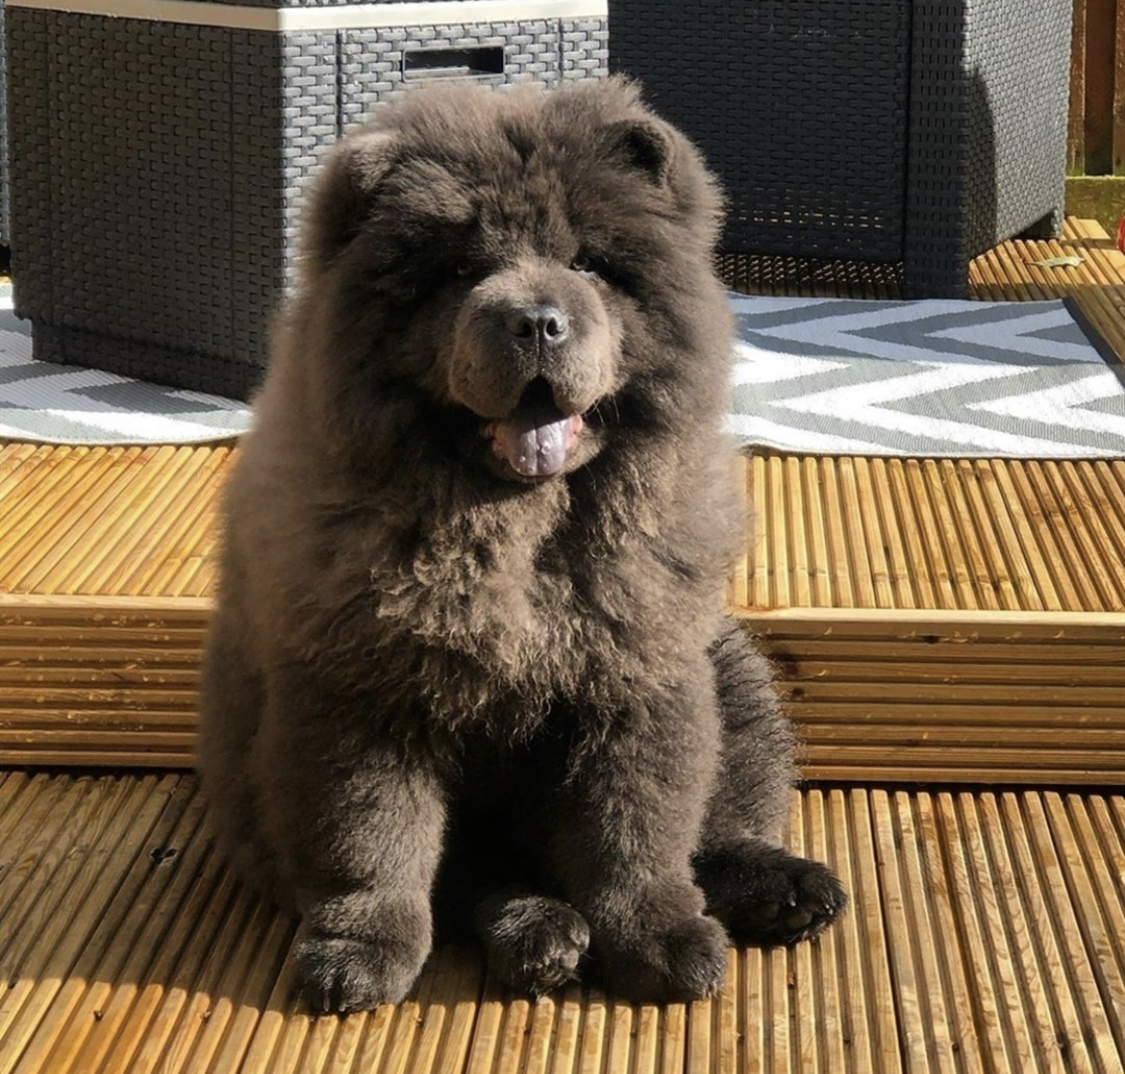 A Chow Chow sitting in the backyard patio while under the sun